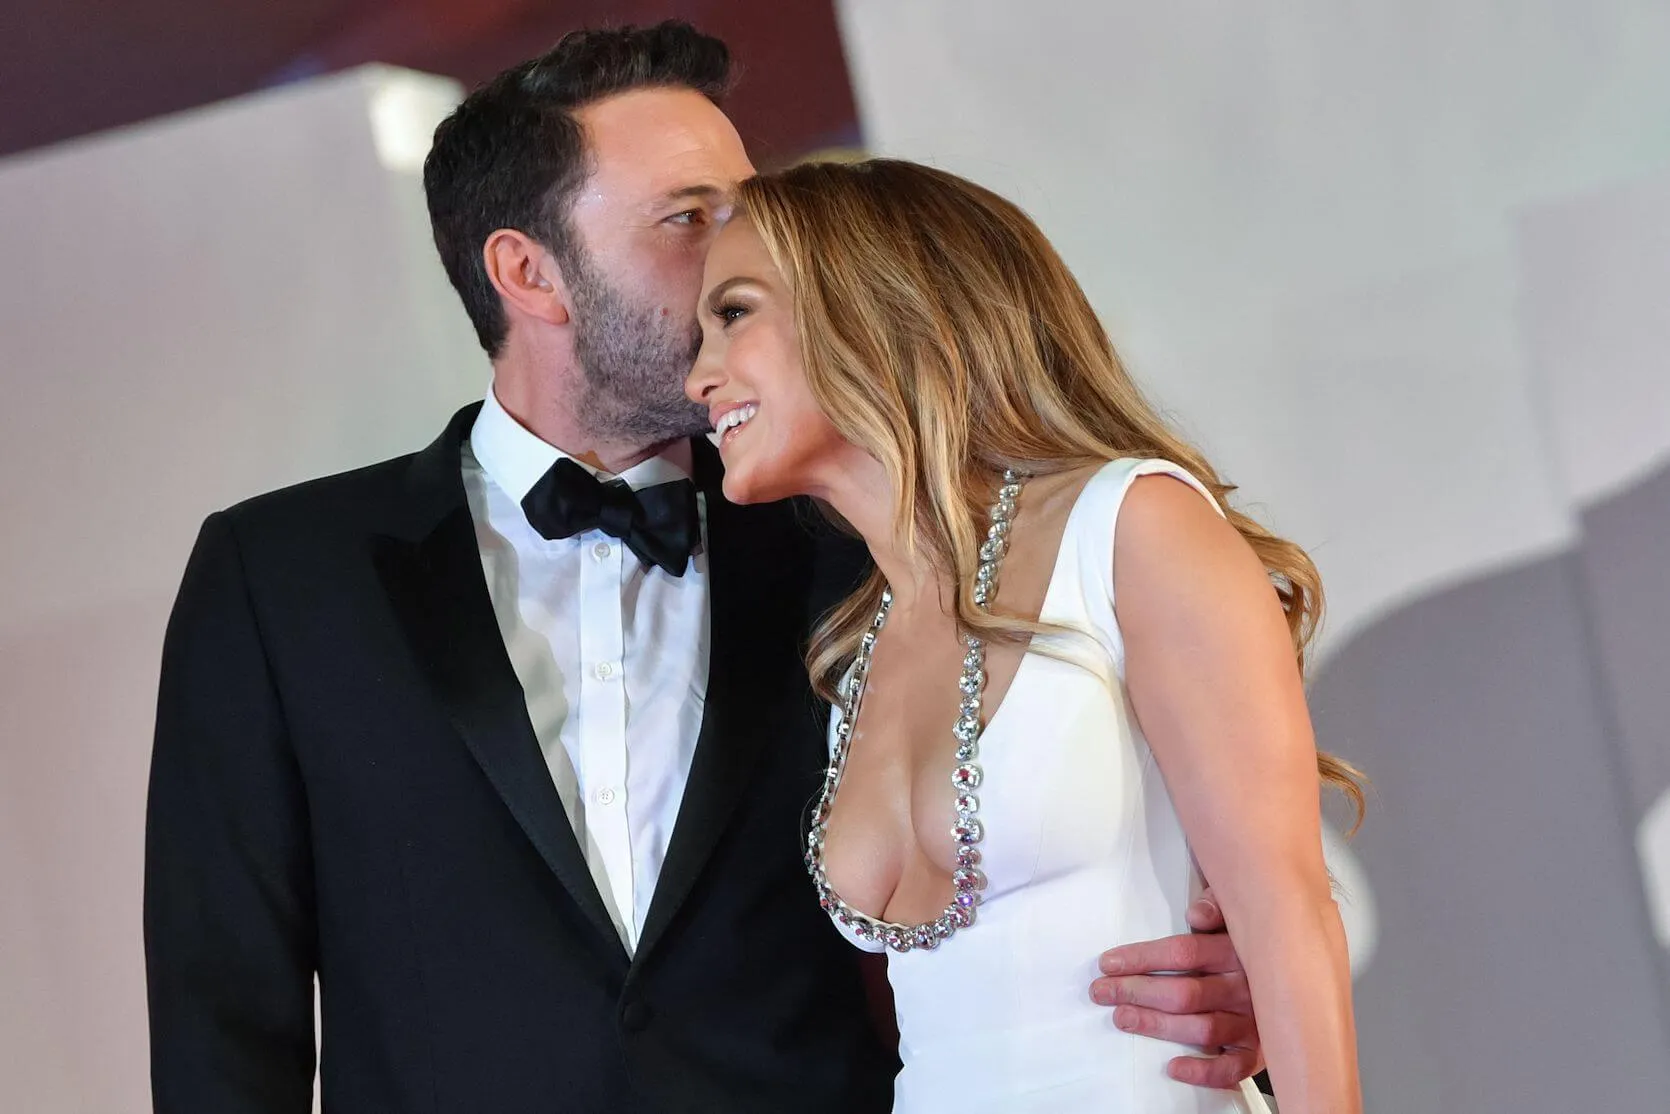 Ben Affleck kissing Jennifer Lopez on the side of the head as she smiles and leans into him at a 2021 movie premiere